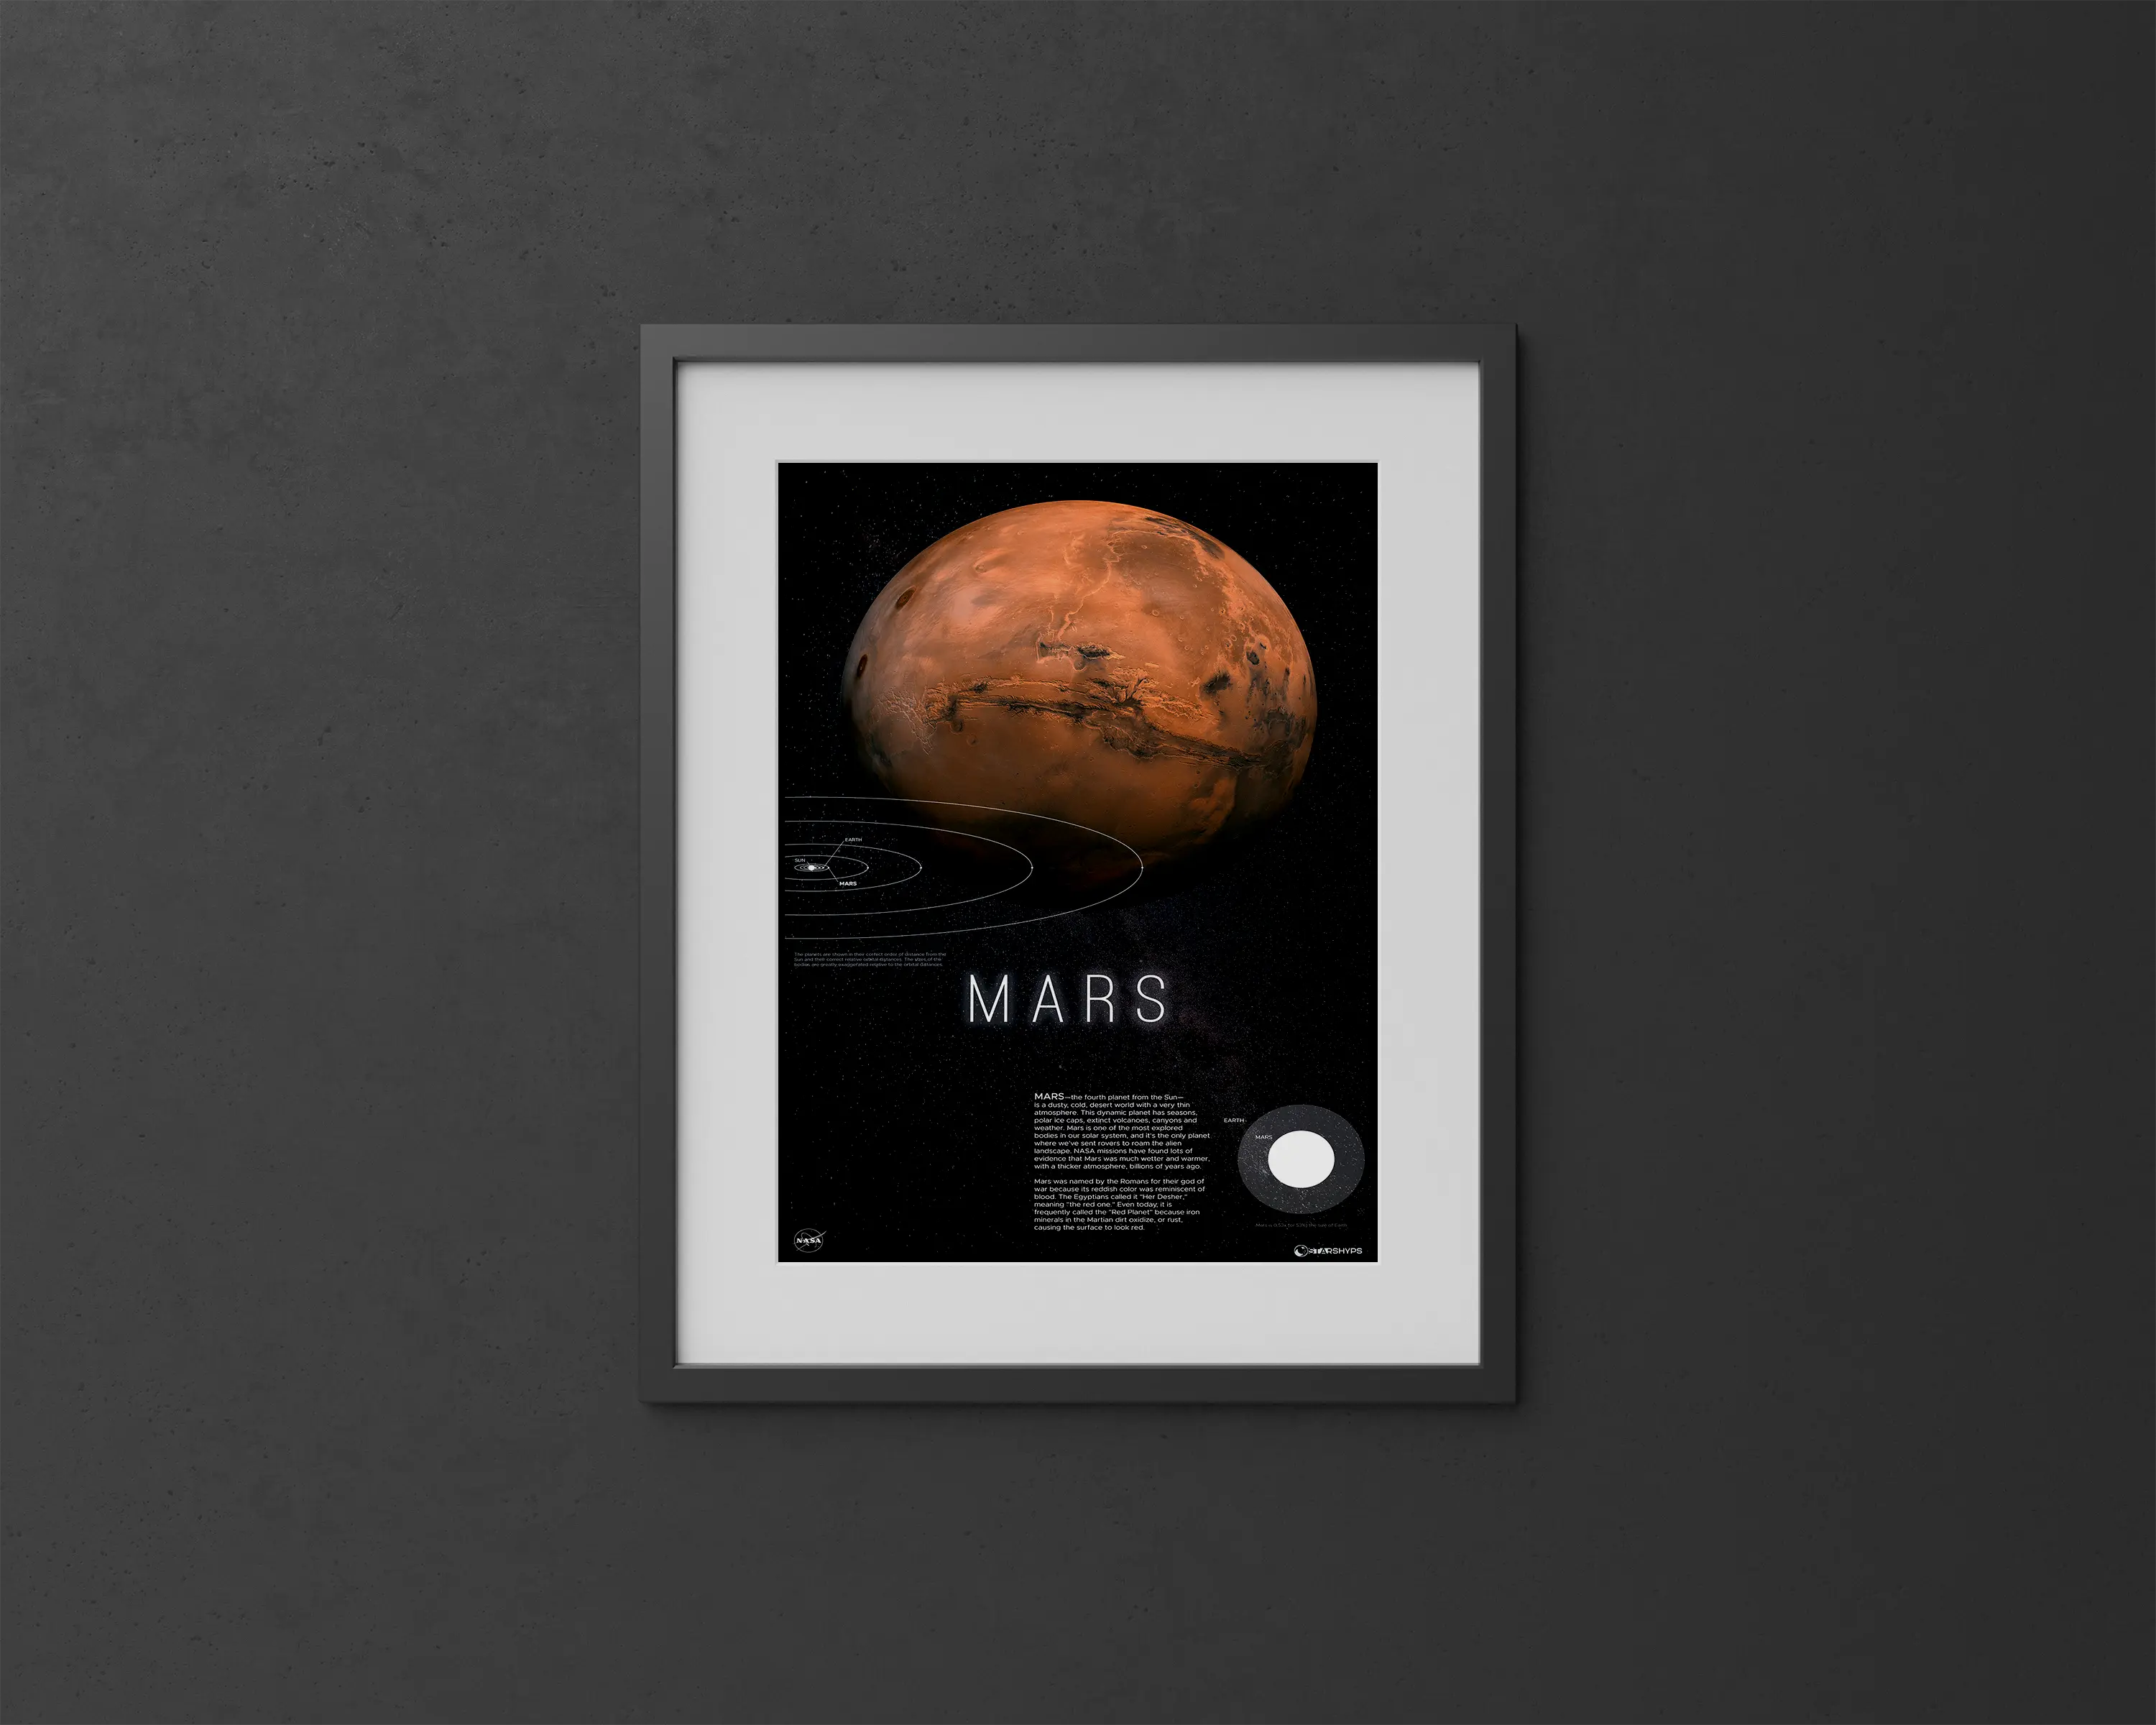 Mars Martian Majesty Print | Mars Print | Rocket Blueprint Posters | The image shows a framed Mars poster on a dark wall. The poster includes a high-resolution image of Mars, the title "MARS," informative text, and a size comparison chart with Earth. The Starshyps watermark is present, with a starry sky as the backdrop.